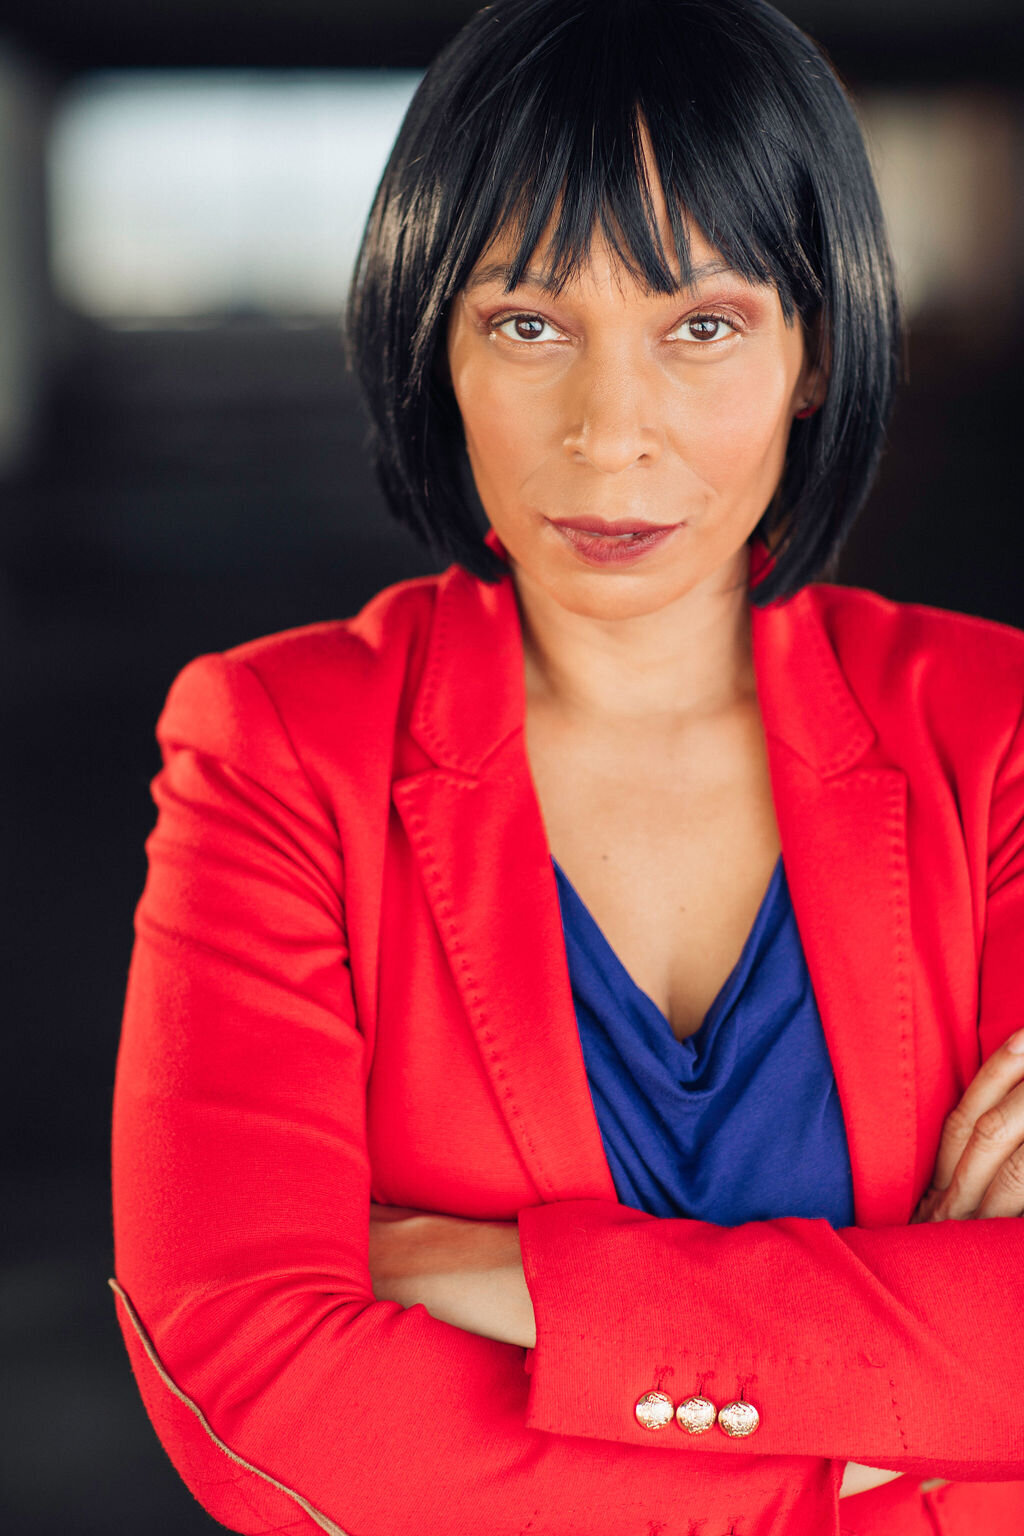 Headshot Photograph Of Woman In Outer Red Blazer And Inner Blue Violet Blouse Los Angeles